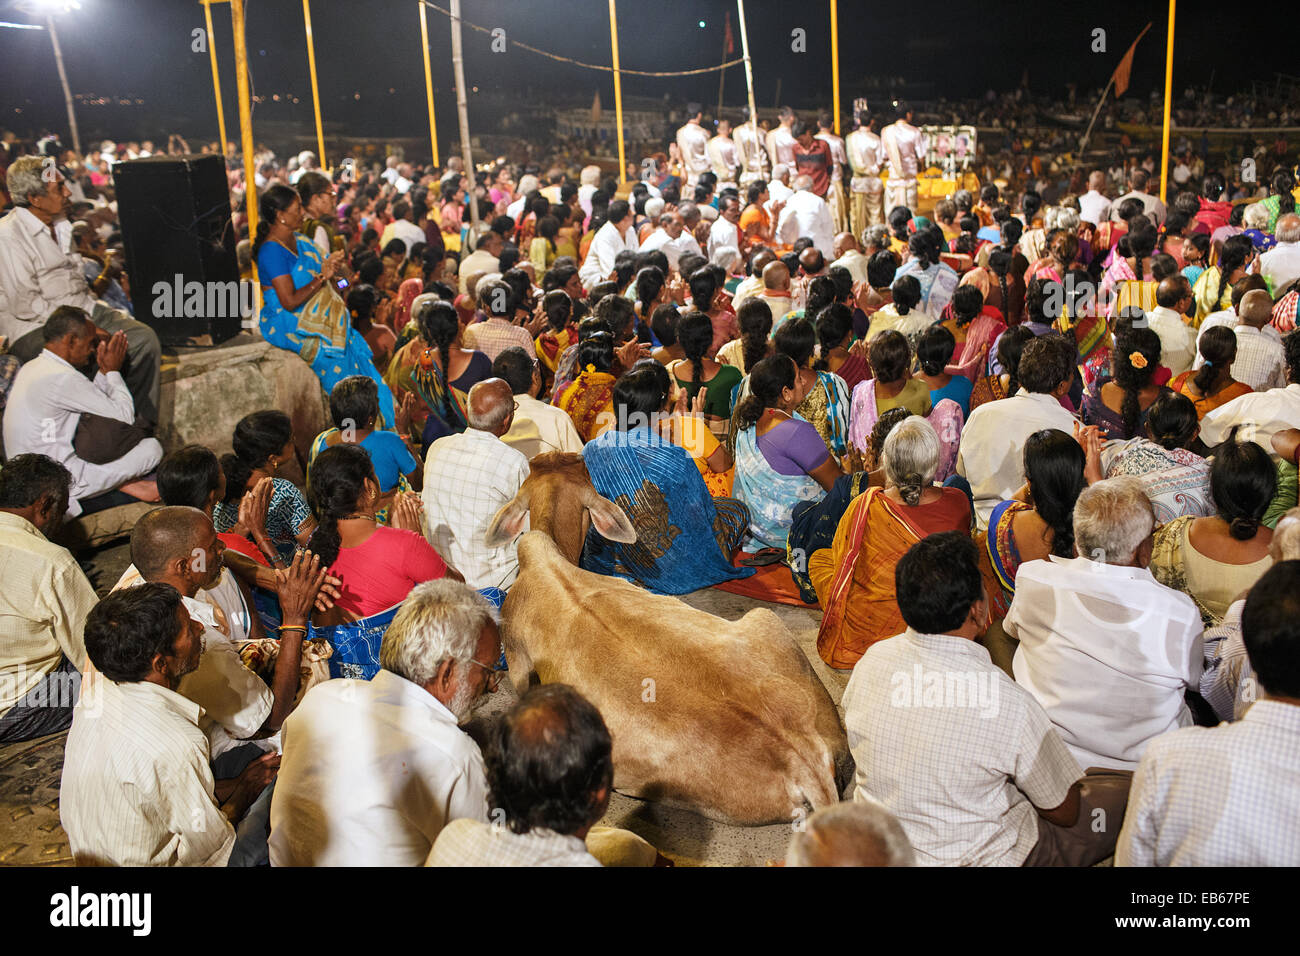 Crowds wait for Ganga Aarti ceremony to start at the main ghat in Varanasi, India. Stock Photo